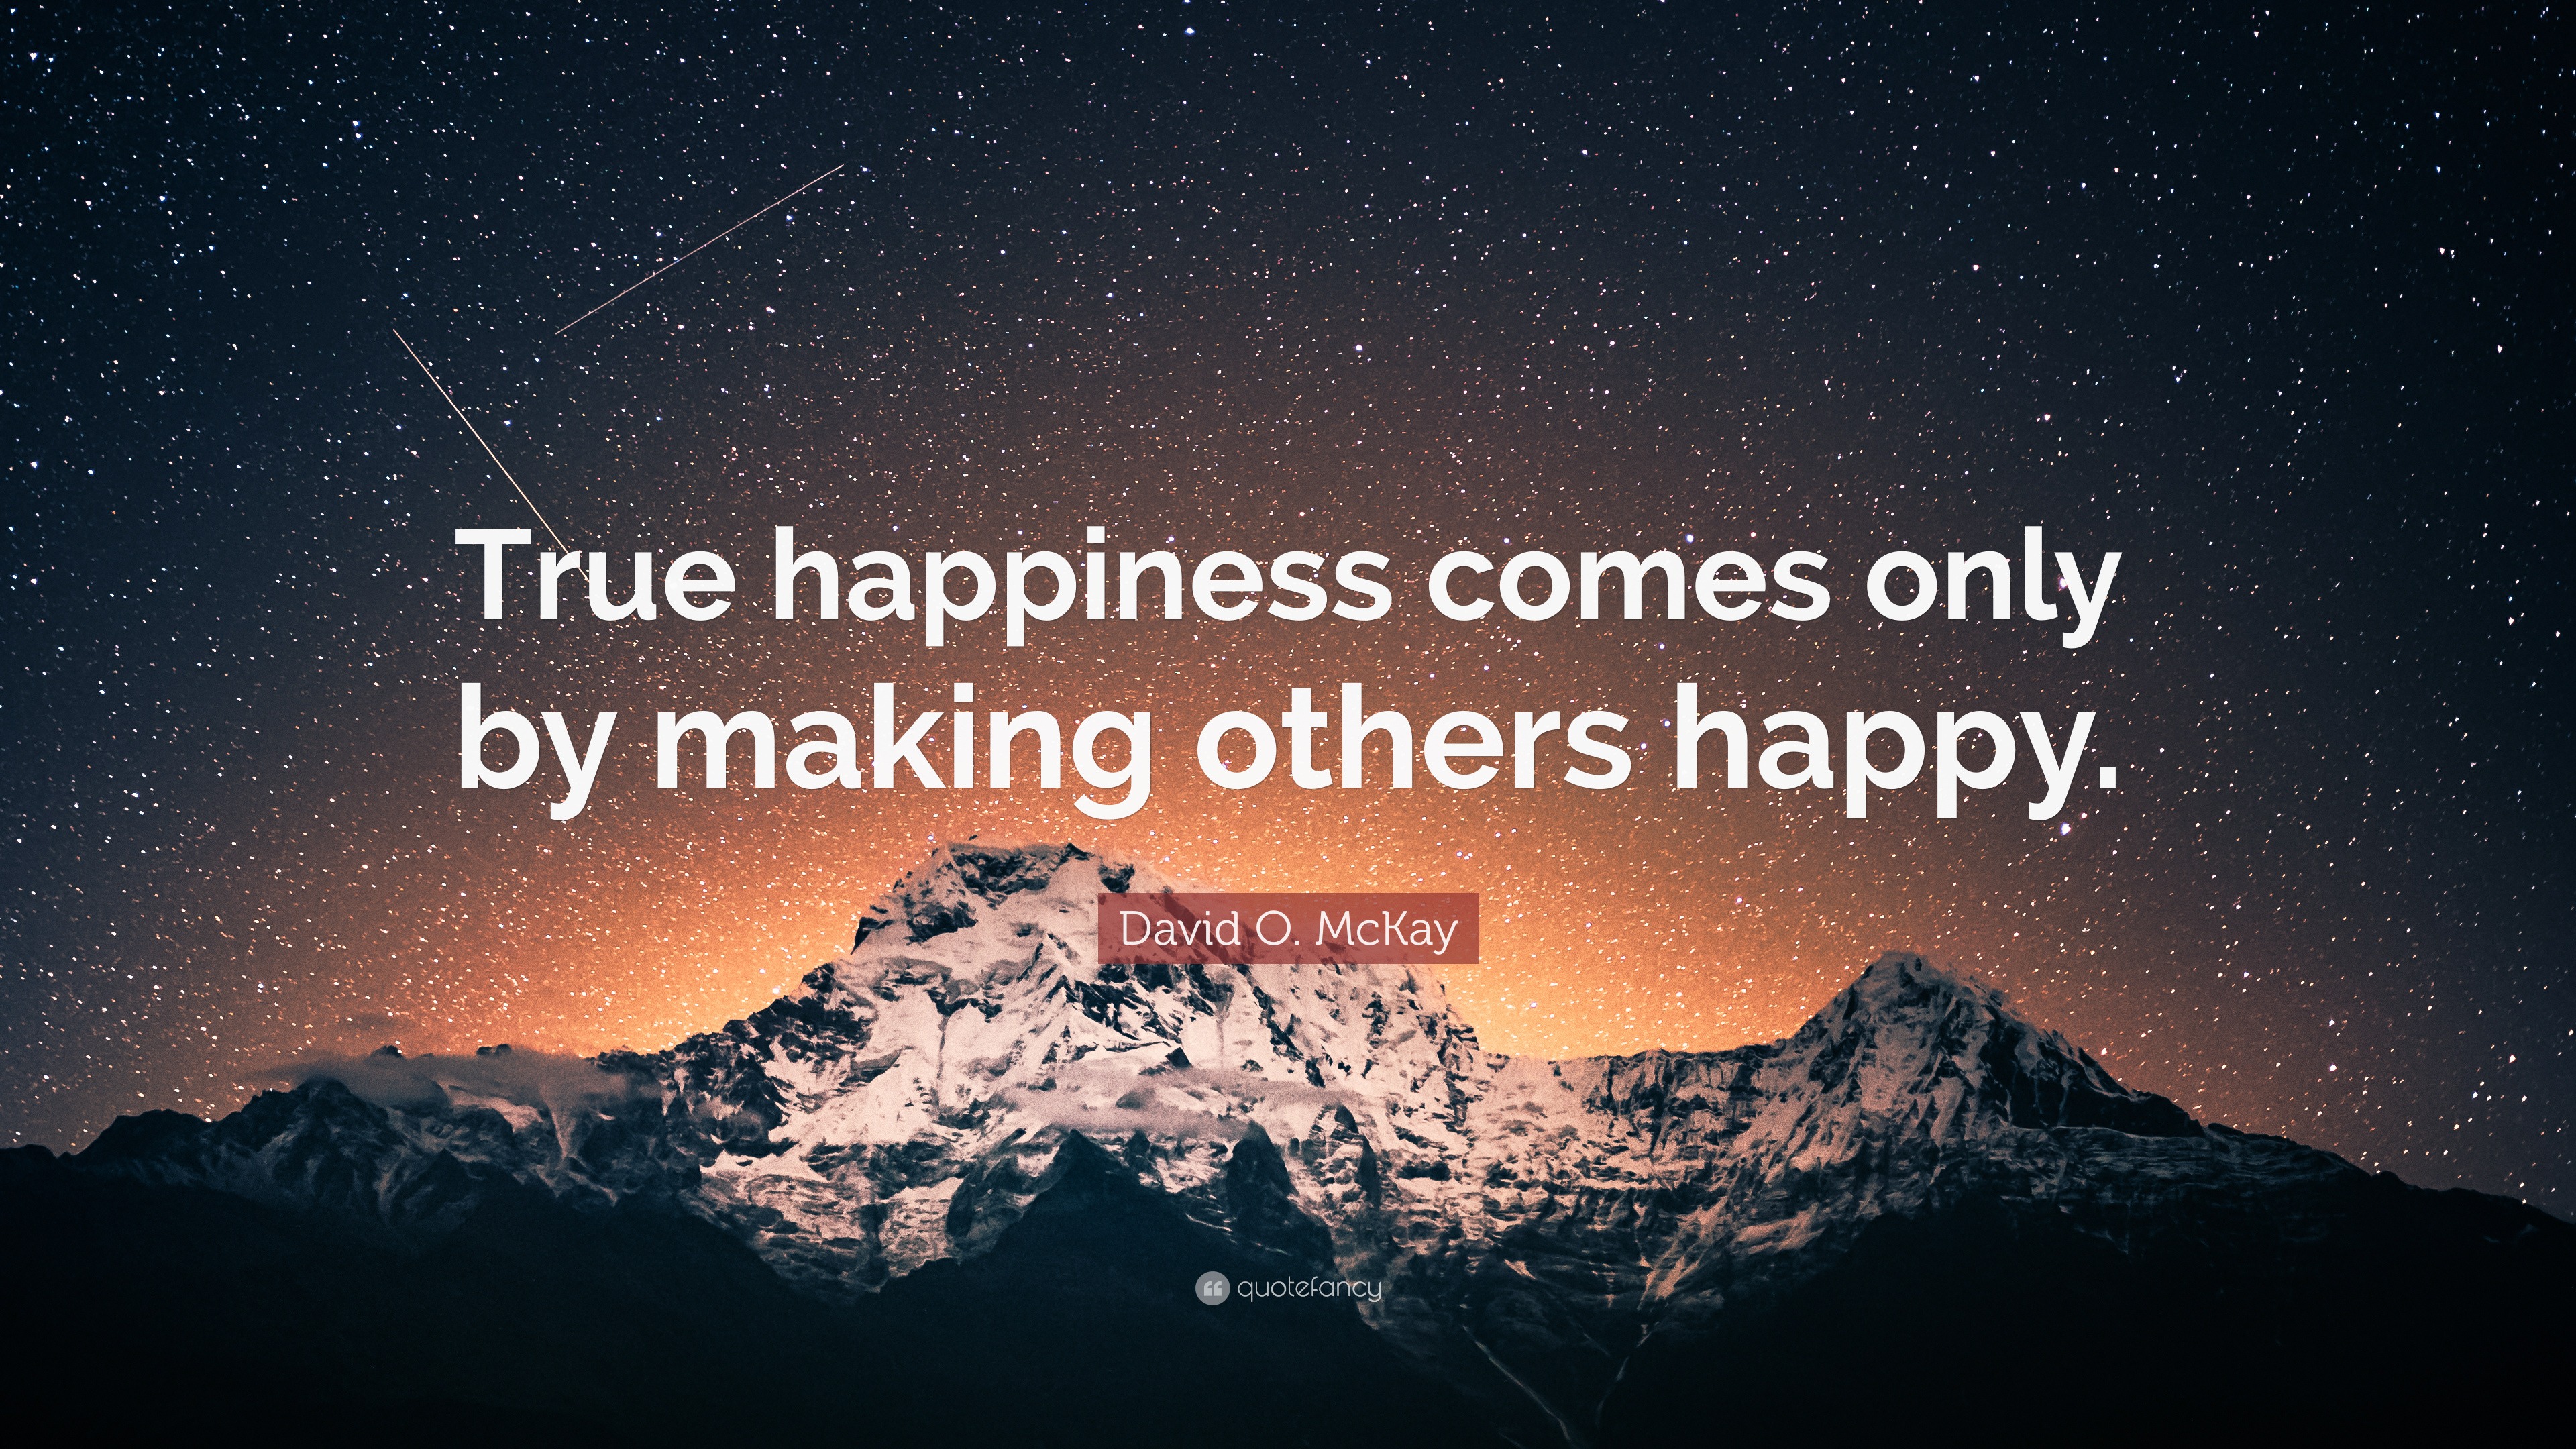 essay on true happiness lies in making others happy